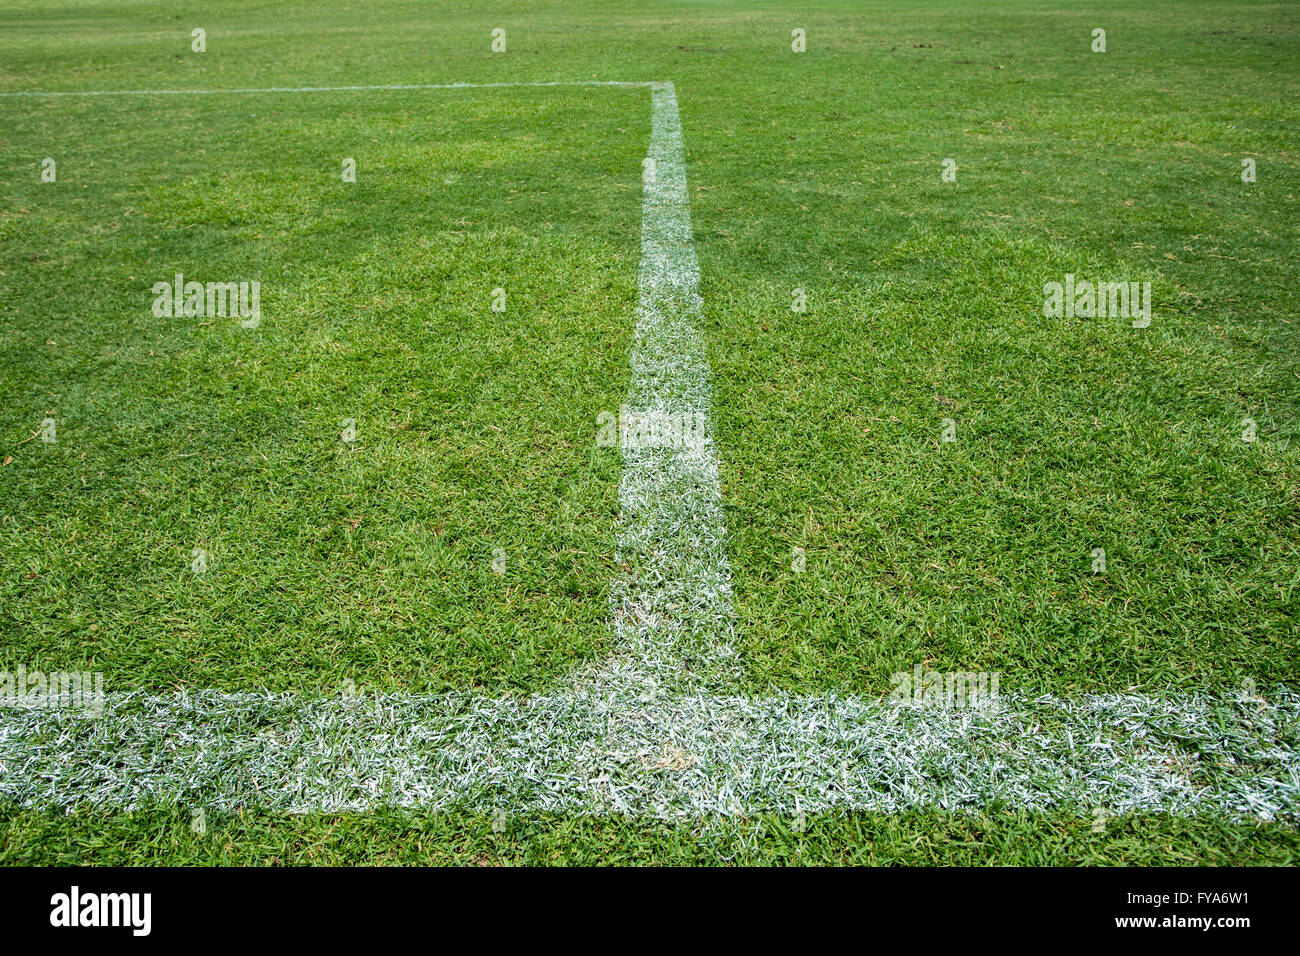 soccer field with white stripe Stock Photo